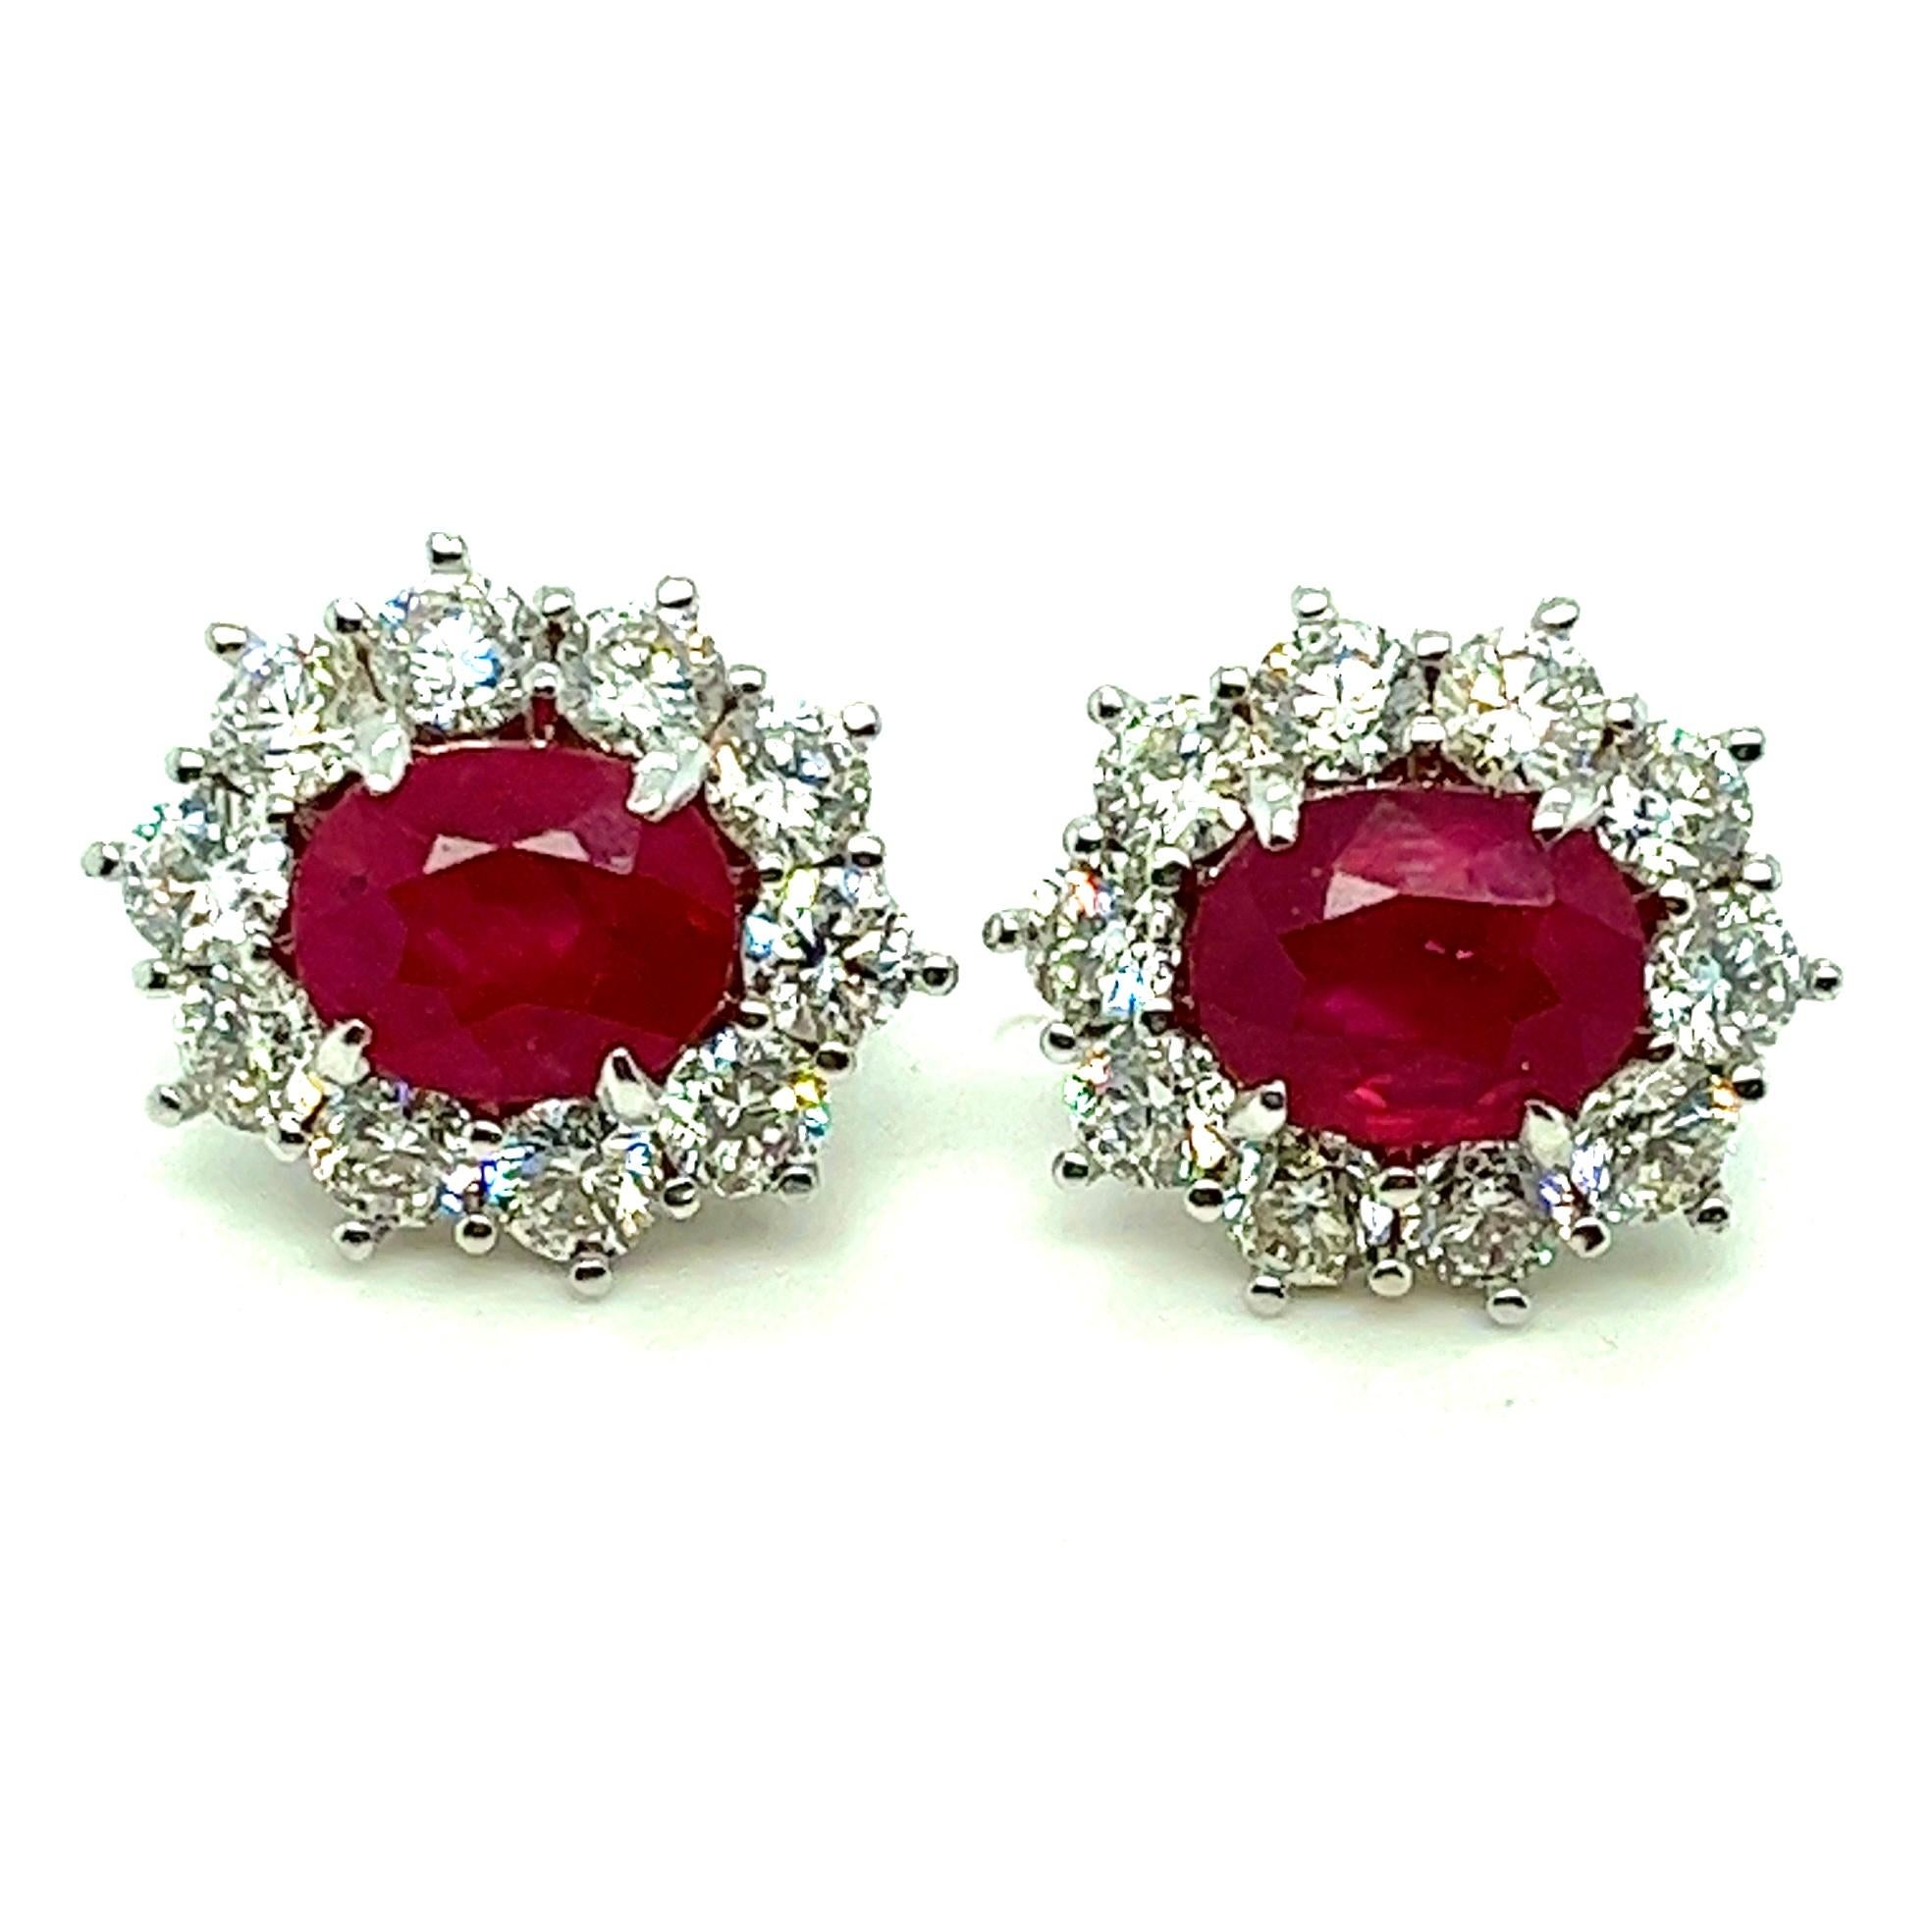 Offered here is a perfectly matched pair of natural earth mined Ruby Diamond Earrings in 18kt gold.
Diamonds: 20 natural round brilliant cut diamonds with an estimated total weight of 3.67 ct. Clarity is VS-SI & Color is G-H. 
Ruby: 2 natural Oval